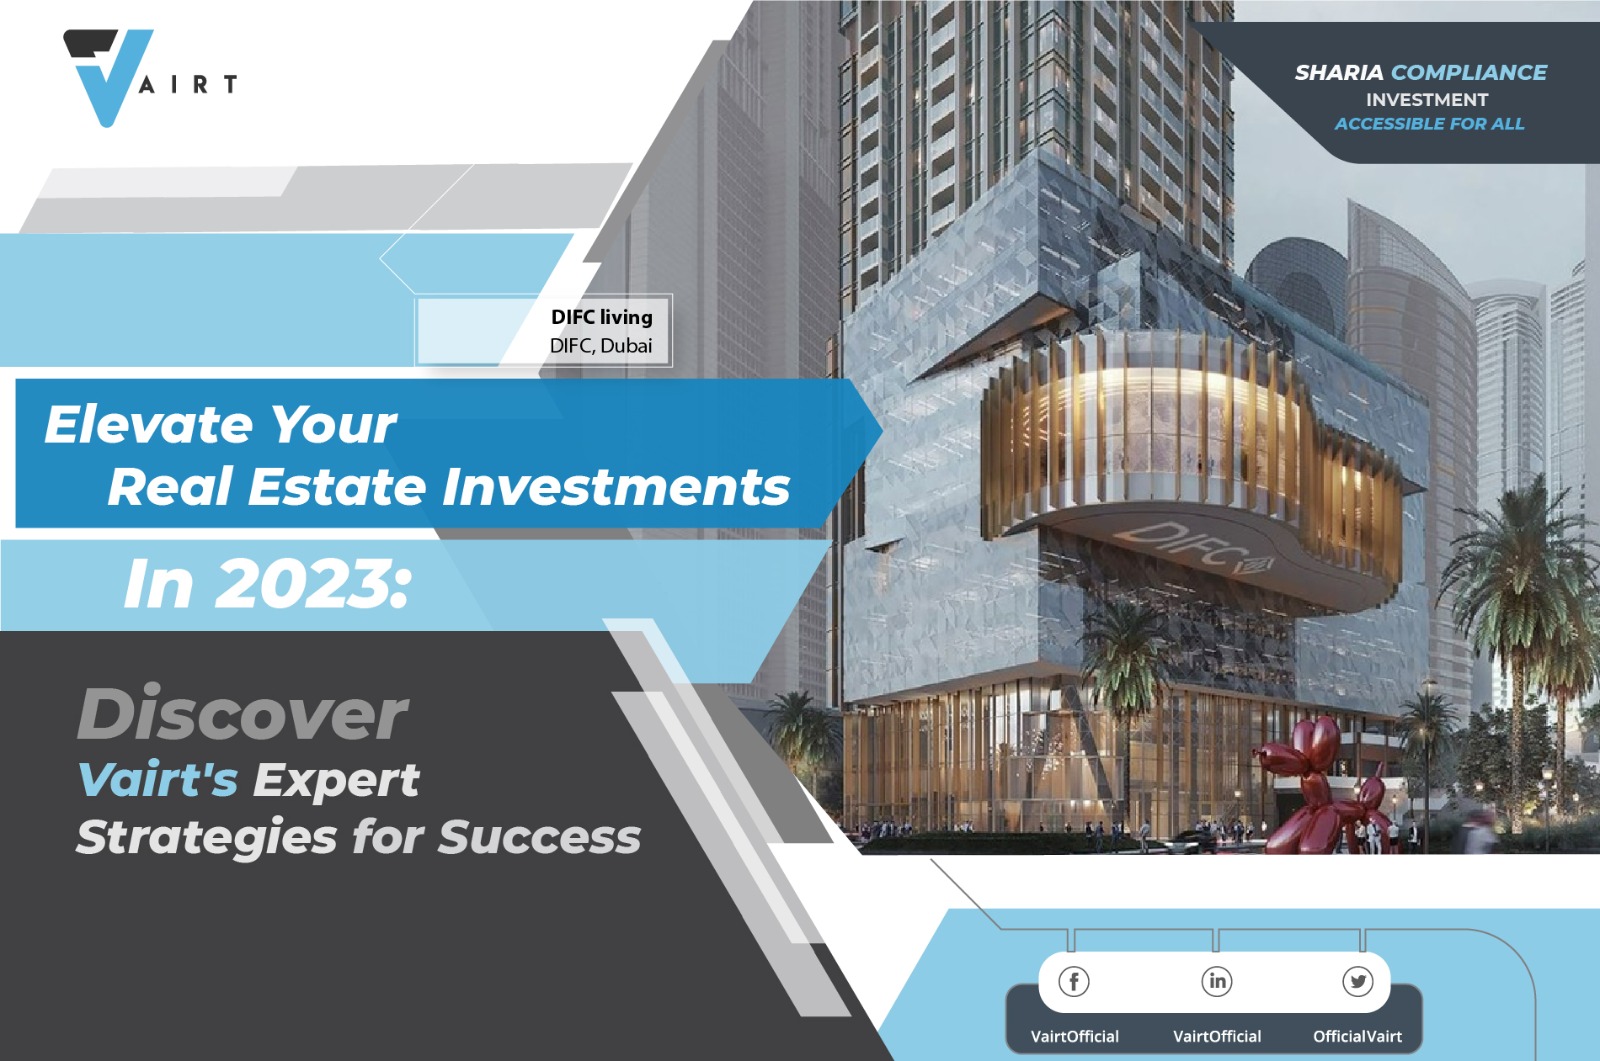 Elevate Your Real Estate Investments in 2023: Discover Vairt's Expert Strategies for Success